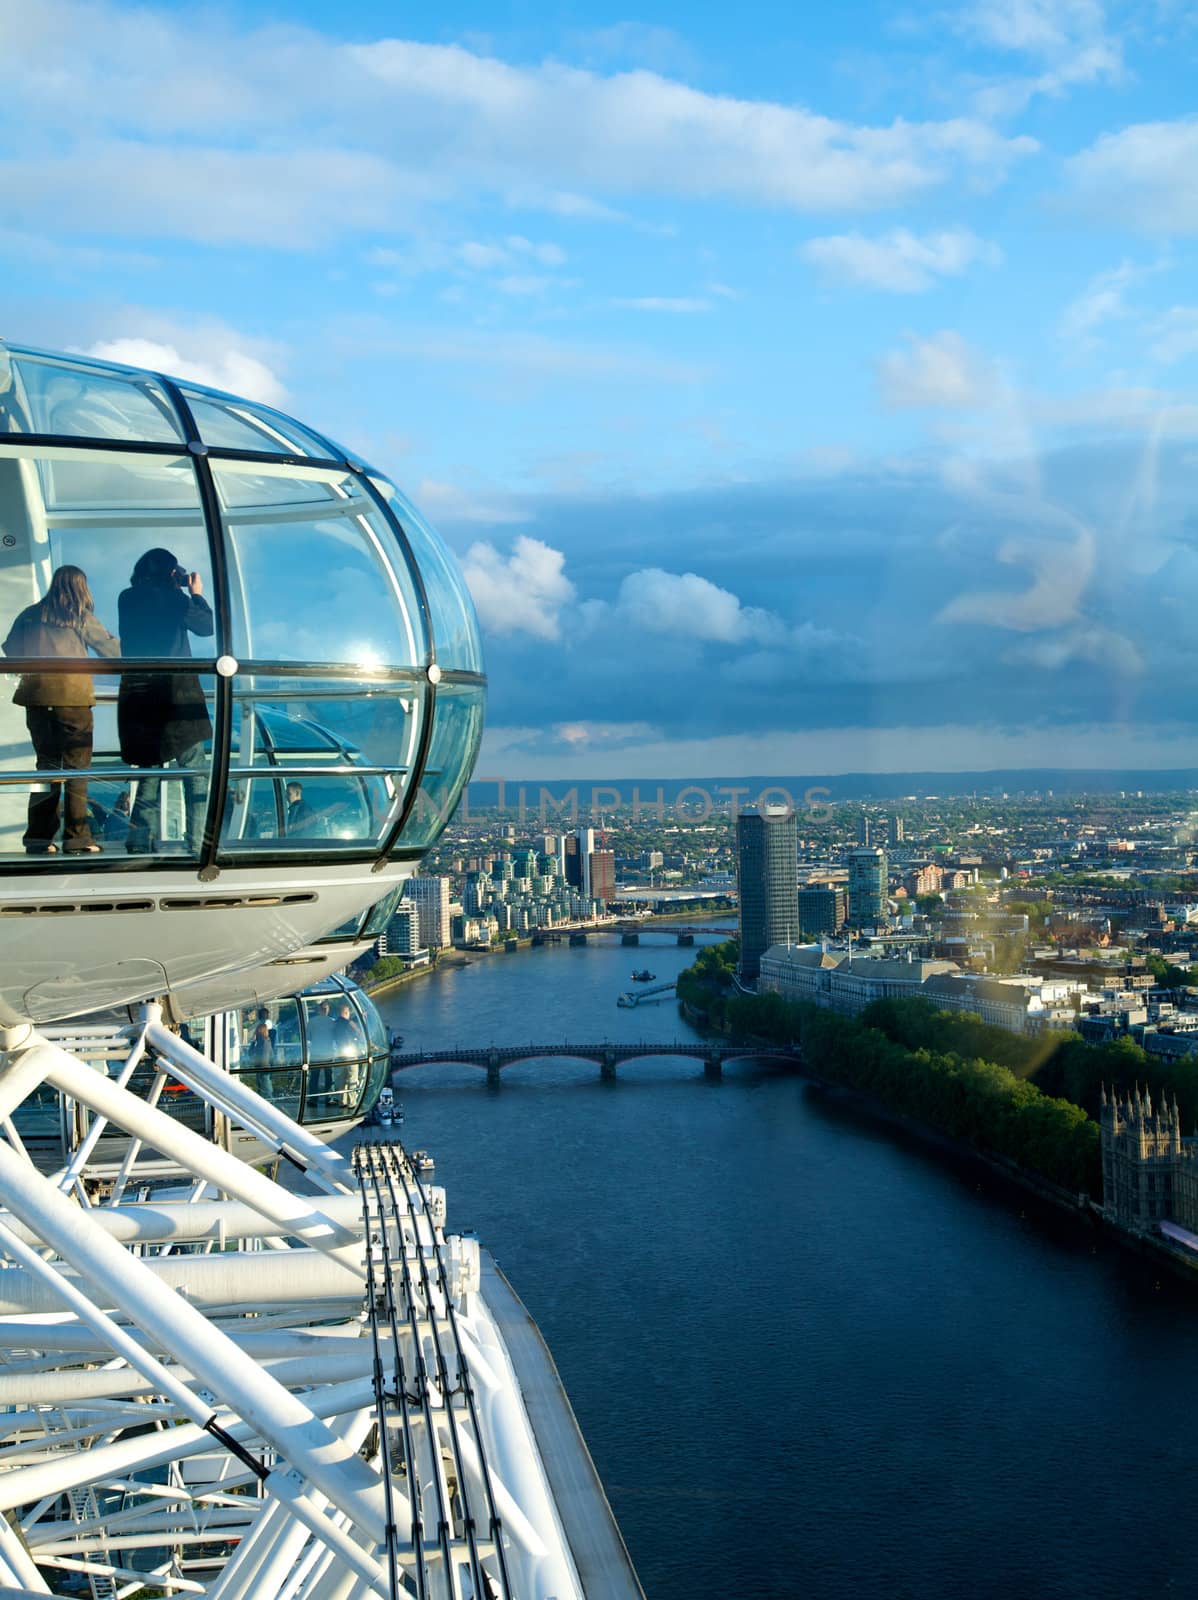 London eye and view over city London by instinia